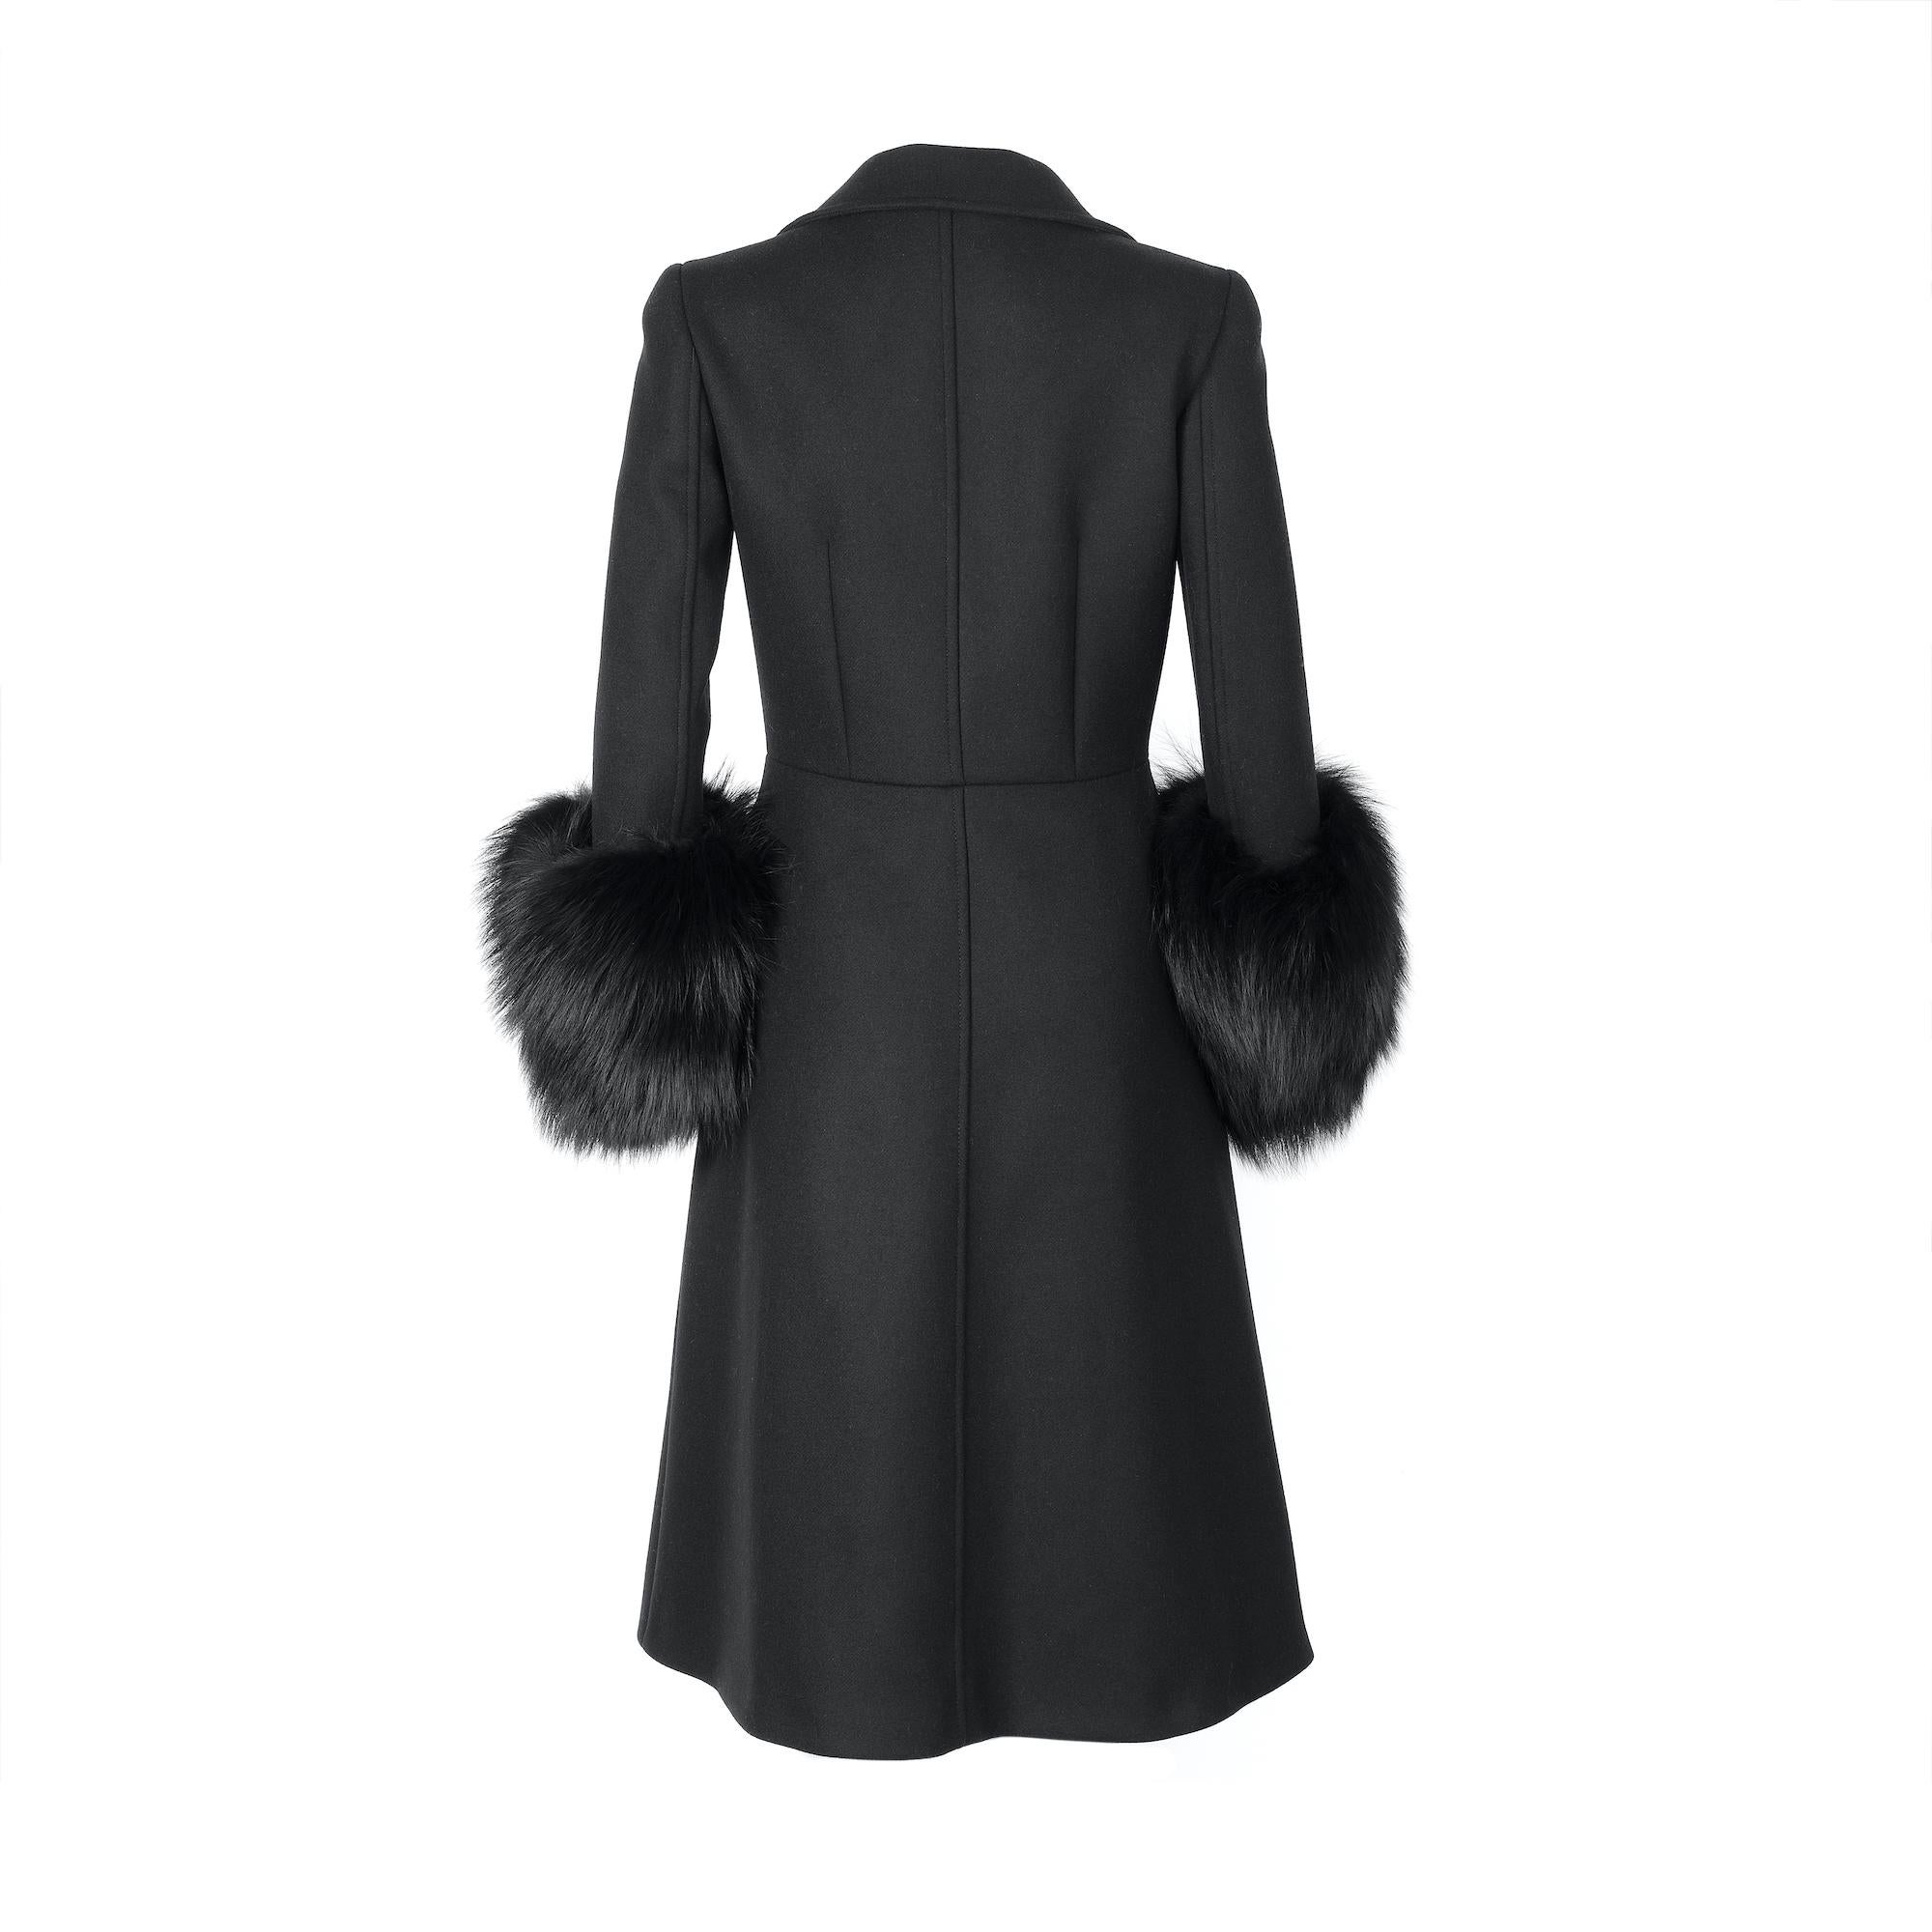 * Wool Blend
* 5 Button Closure
* Classic Collar
* Fur cuffs
* A-Line Fit
* Excellent Condition: This pre-owned piece has almost no signs of wear.

Please note that most items we carry have been previously owned unless marked as ‘unworn’. Unless